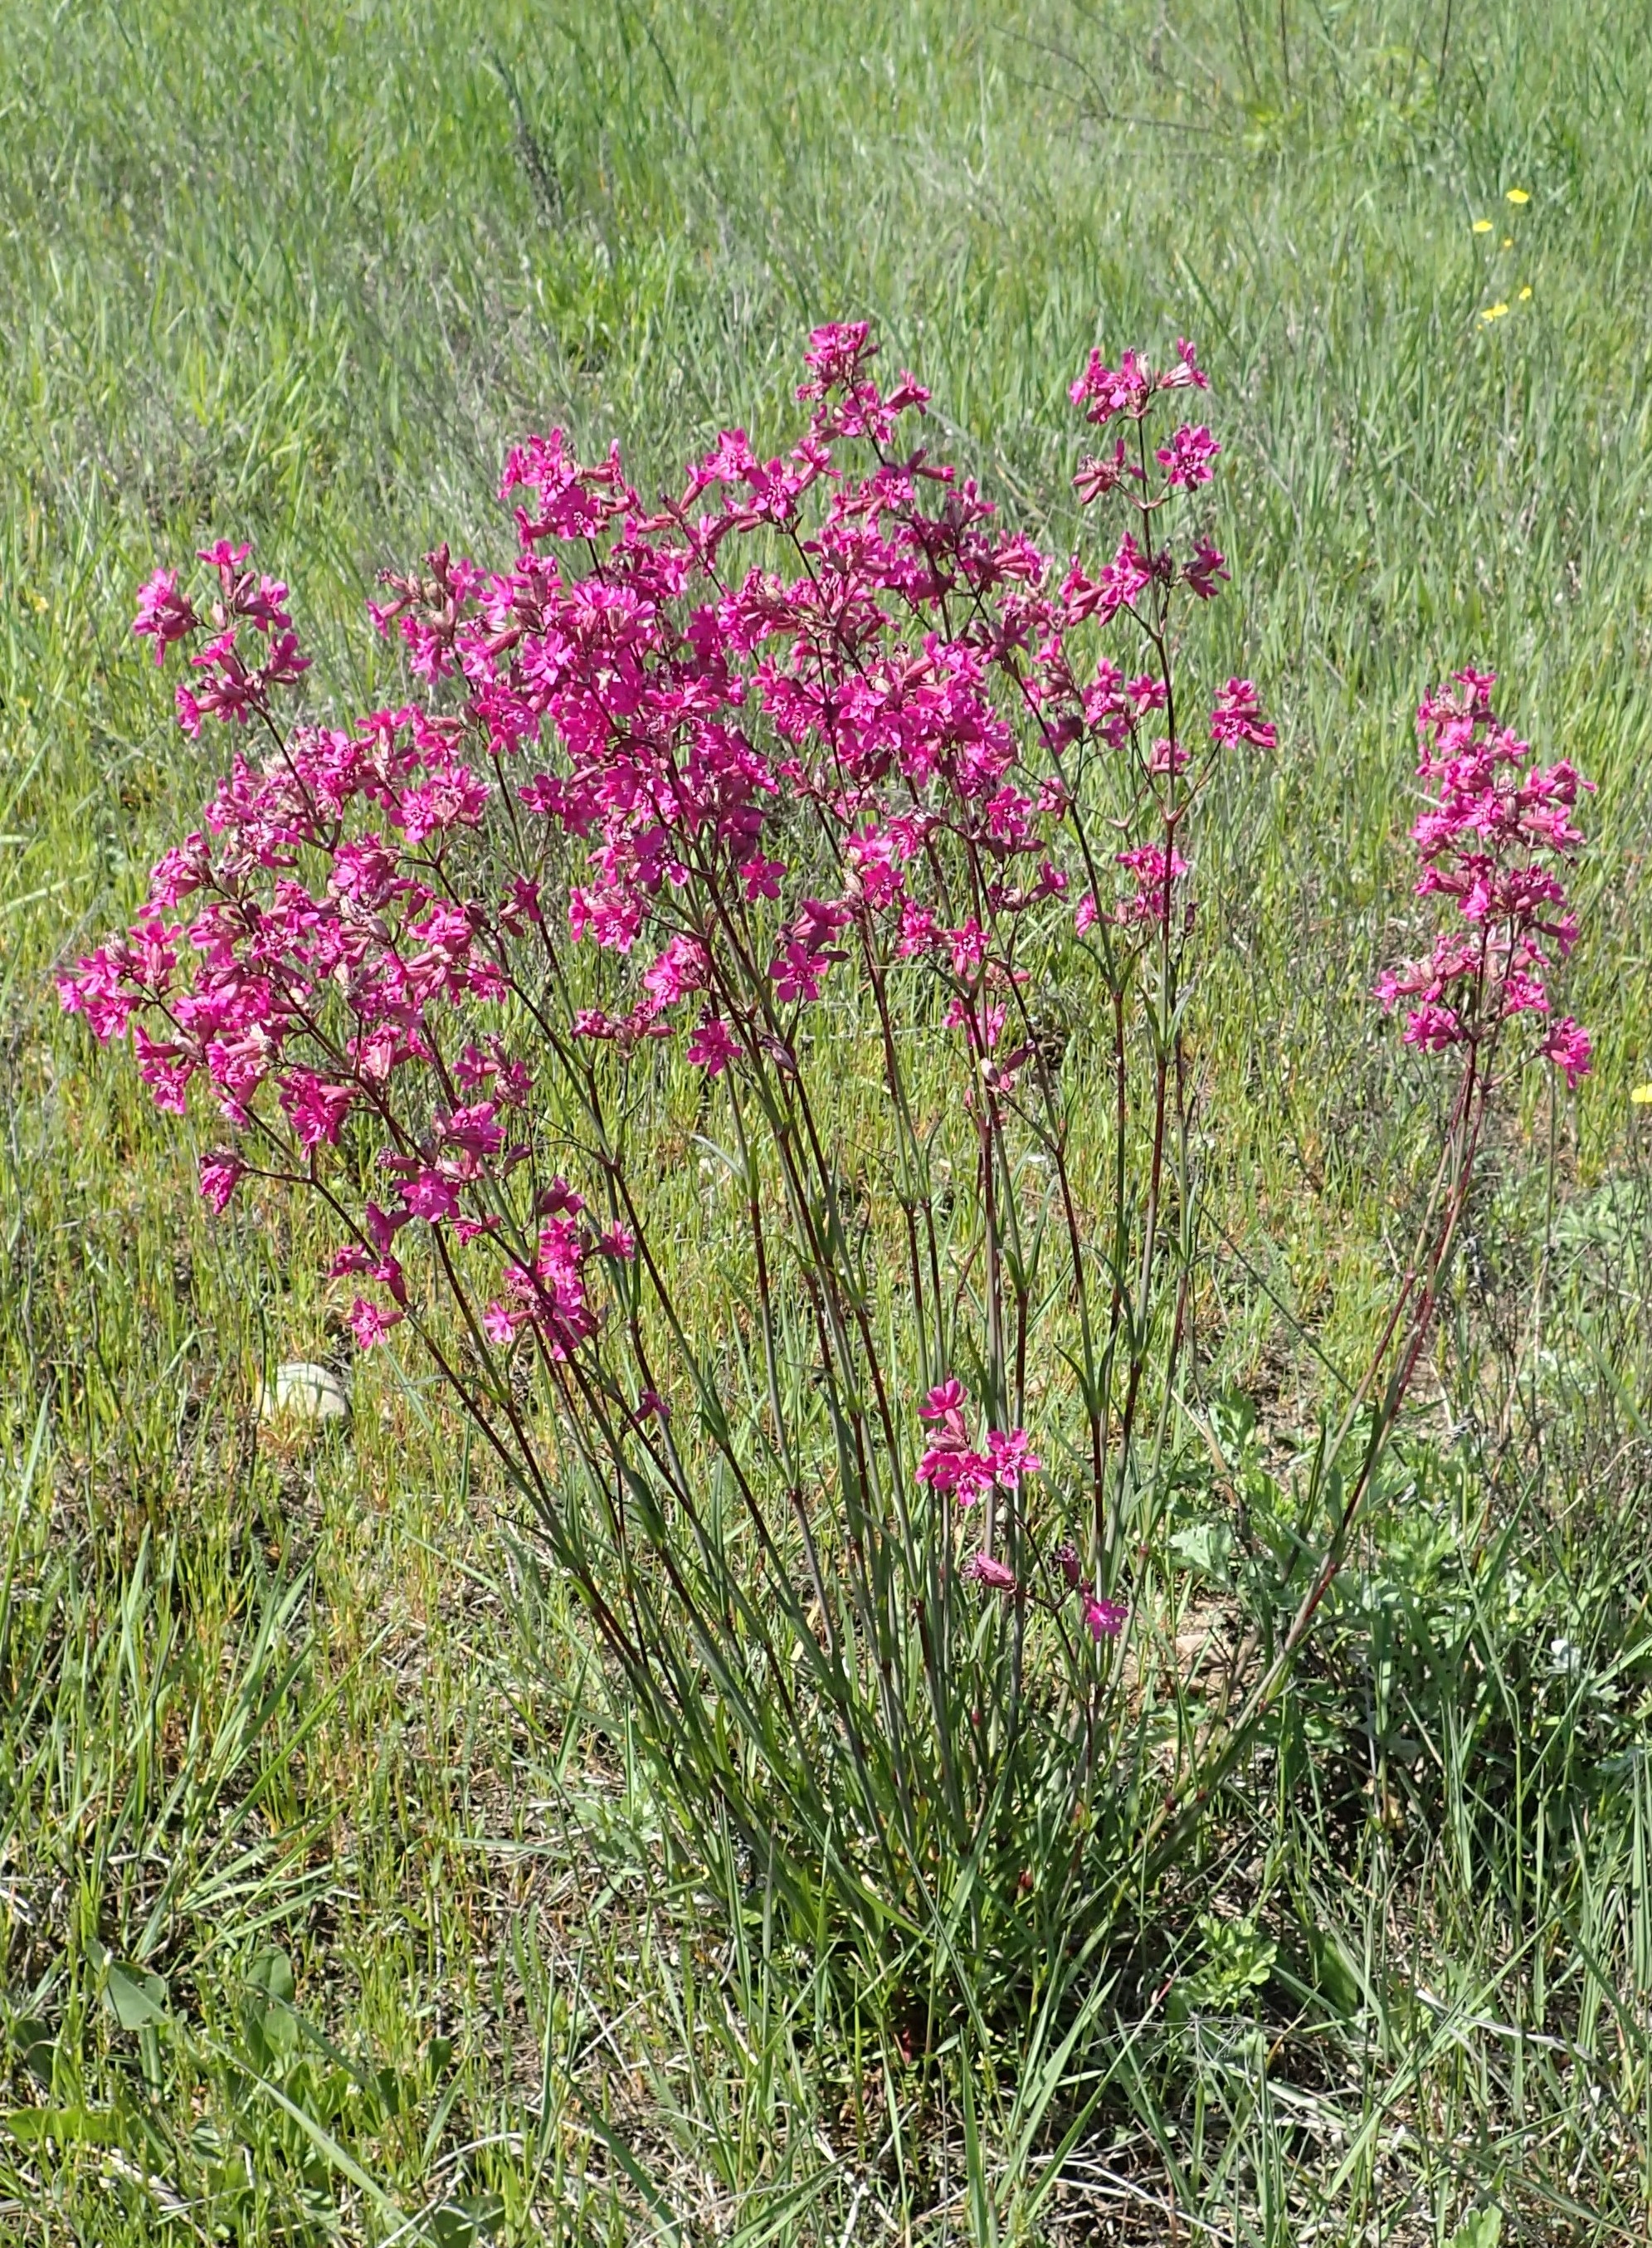 pink flowers with green leaves and brown-green stems